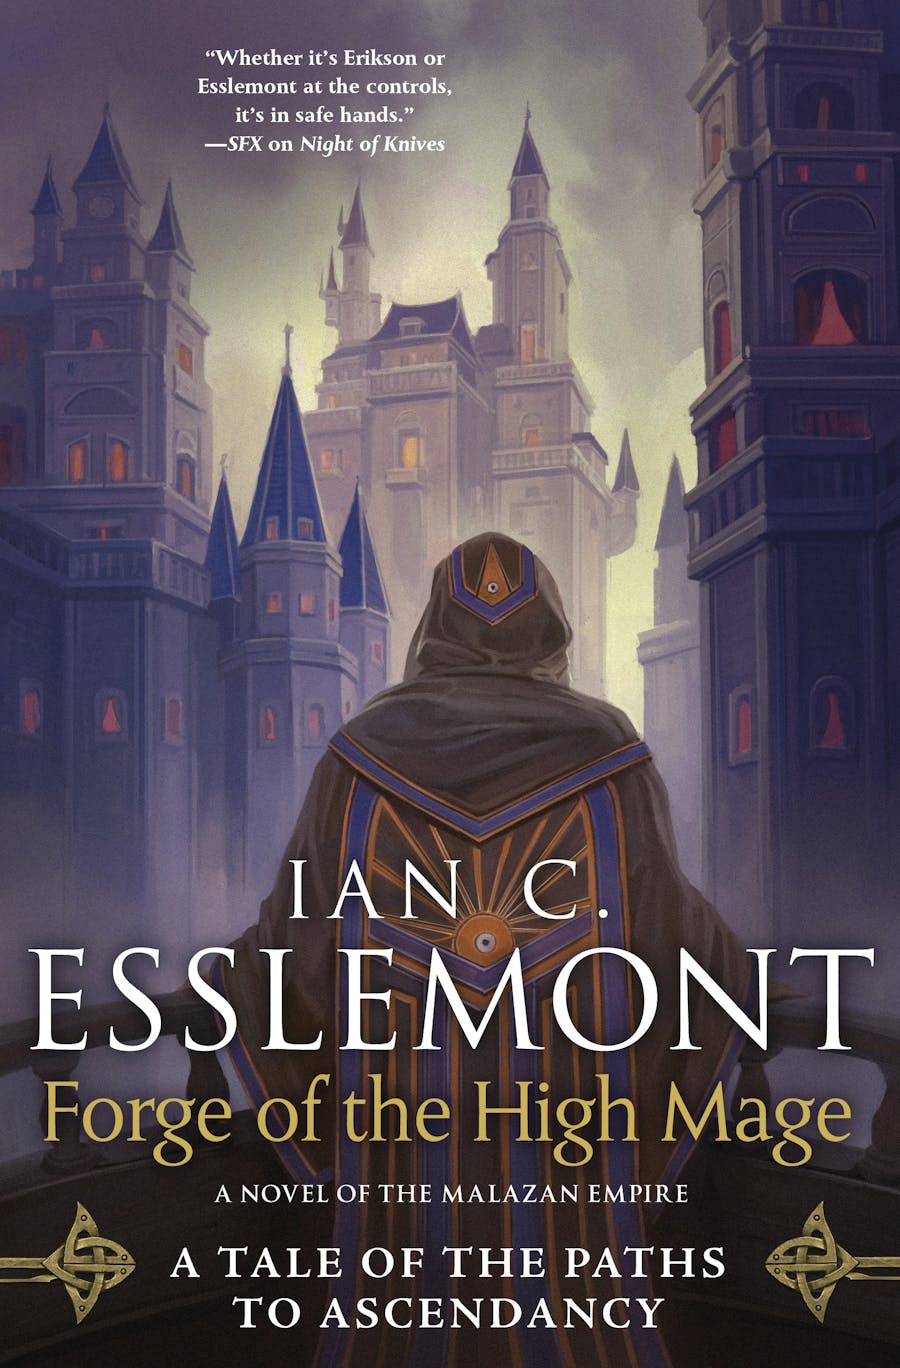 Ian Cameron Esslemont: Forge of the High Mage (Paperback, Macmillan)